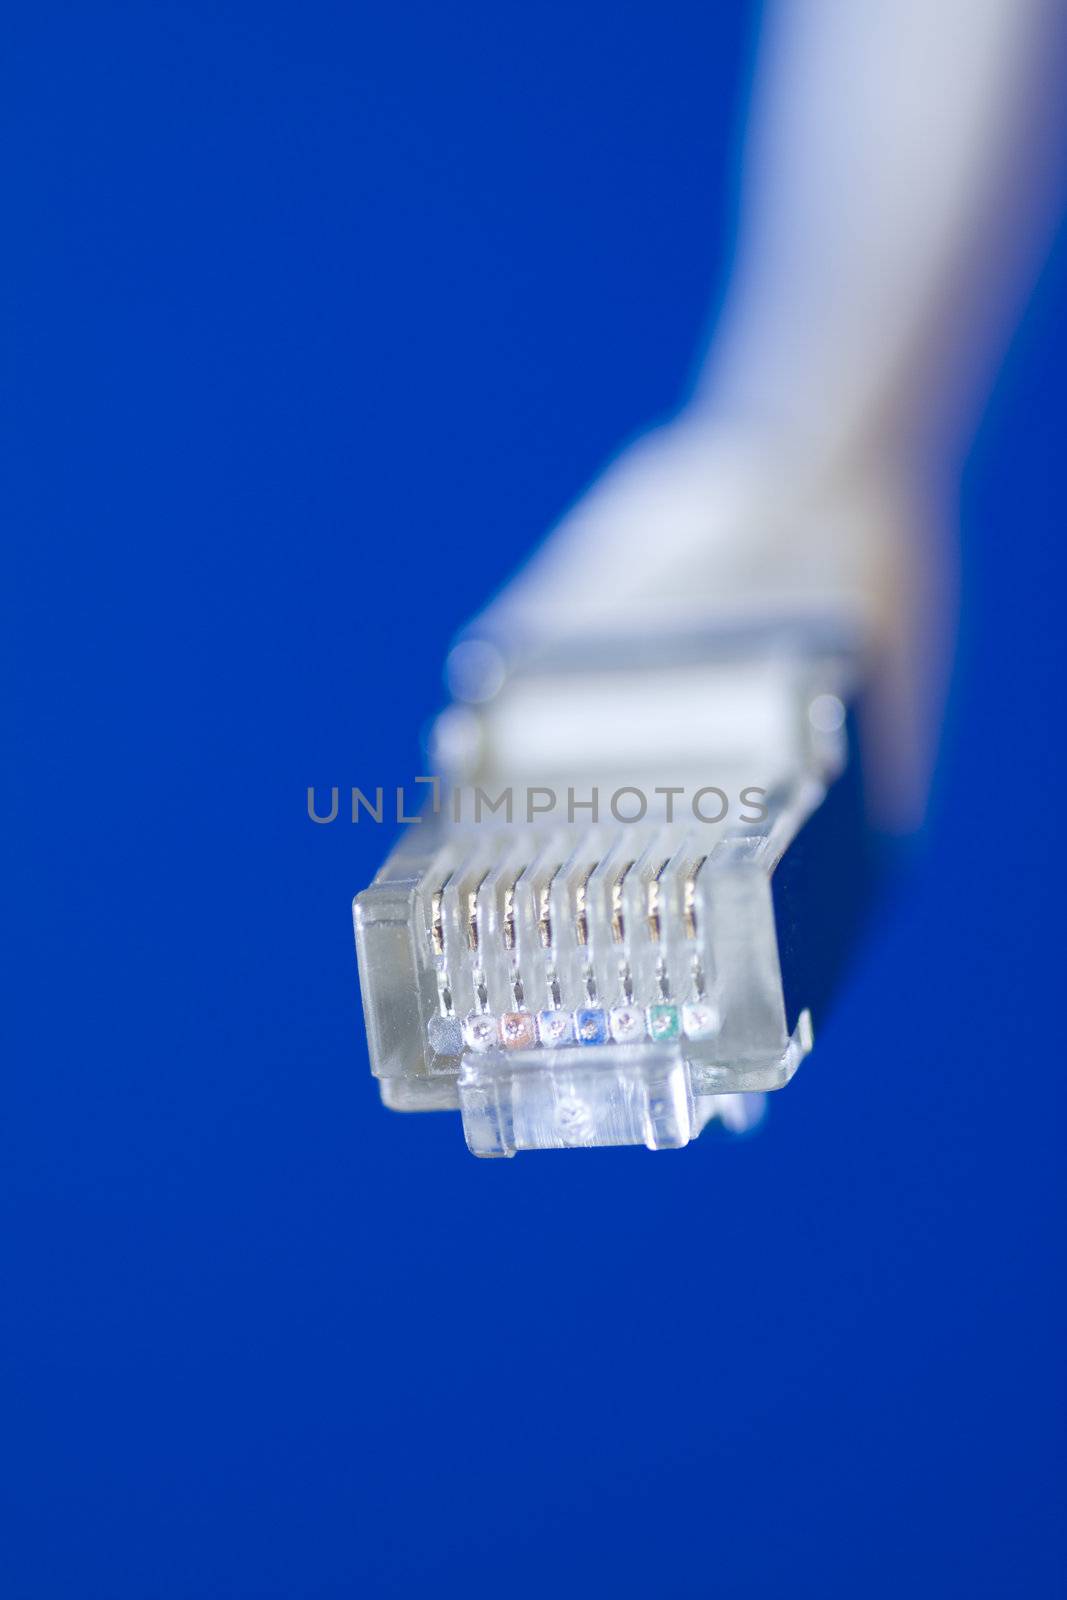 network cable by ctacik